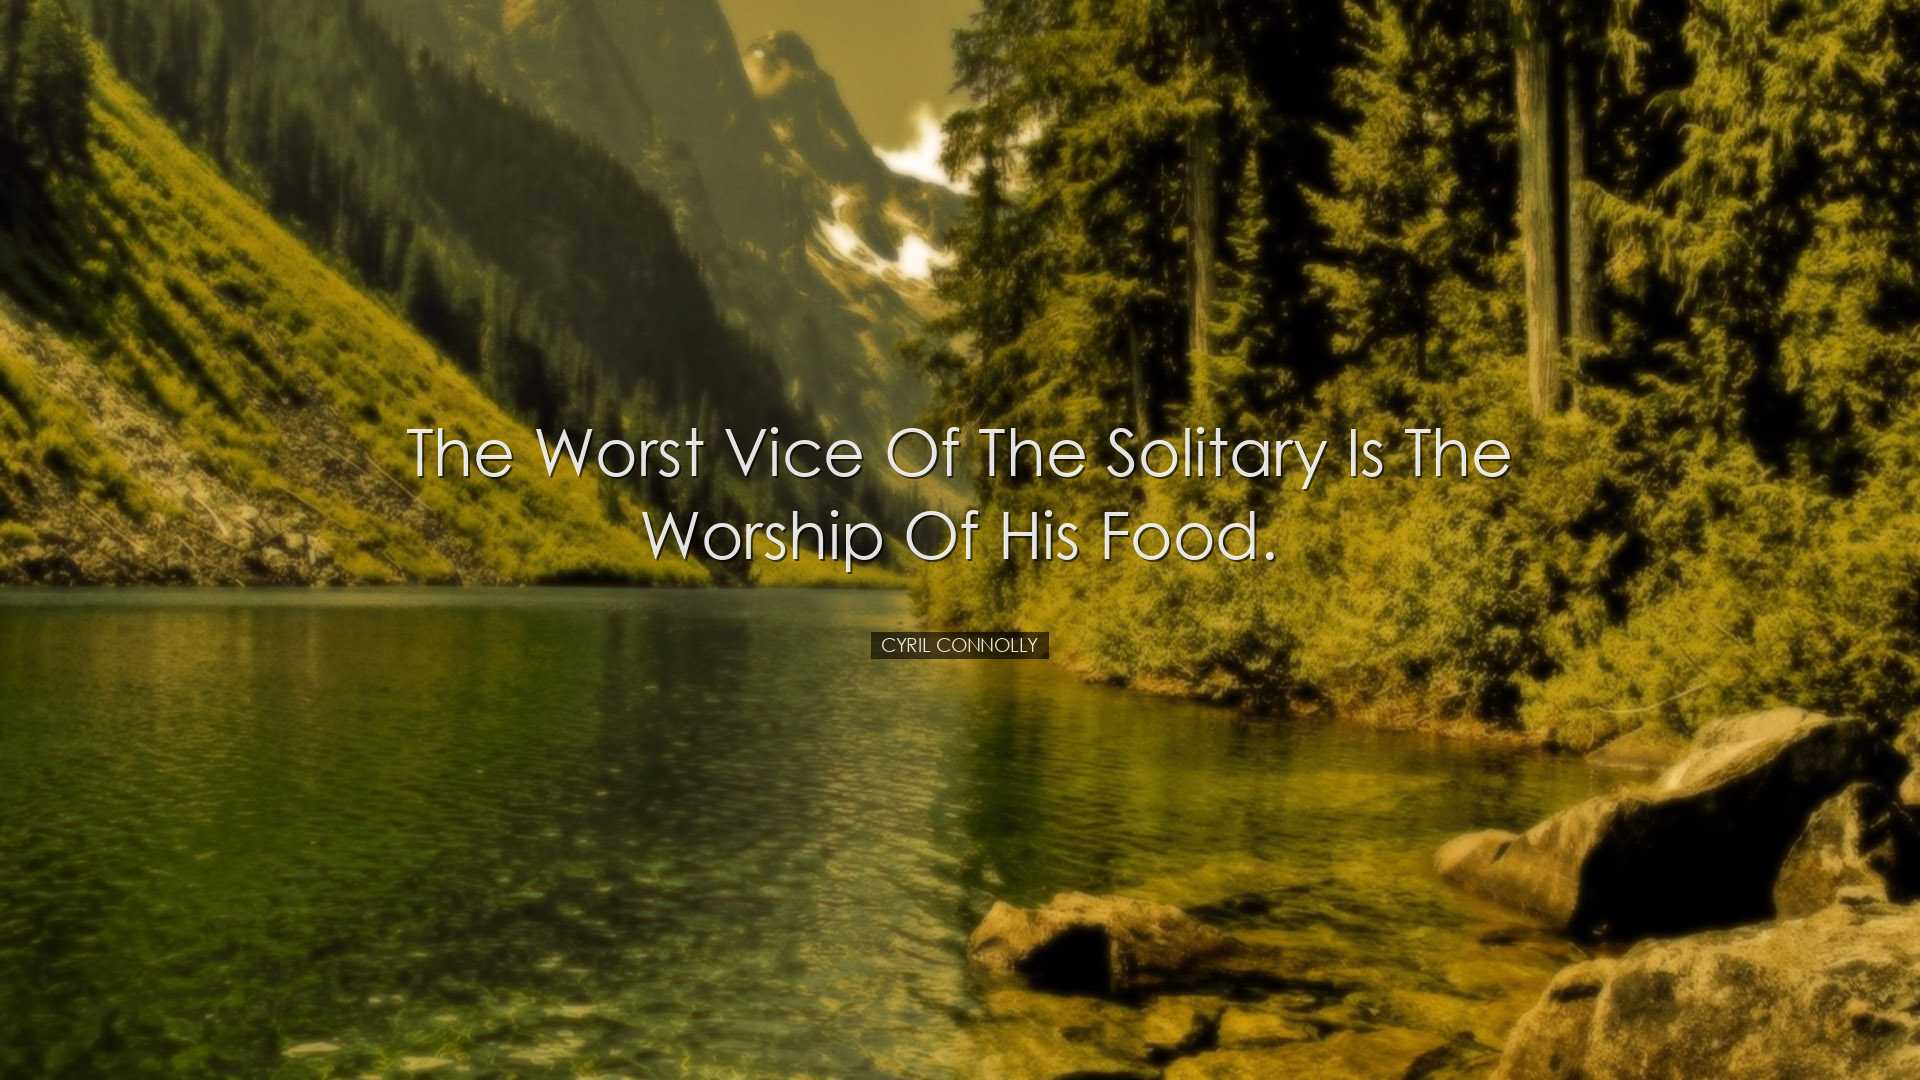 The worst vice of the solitary is the worship of his food. - Cyril